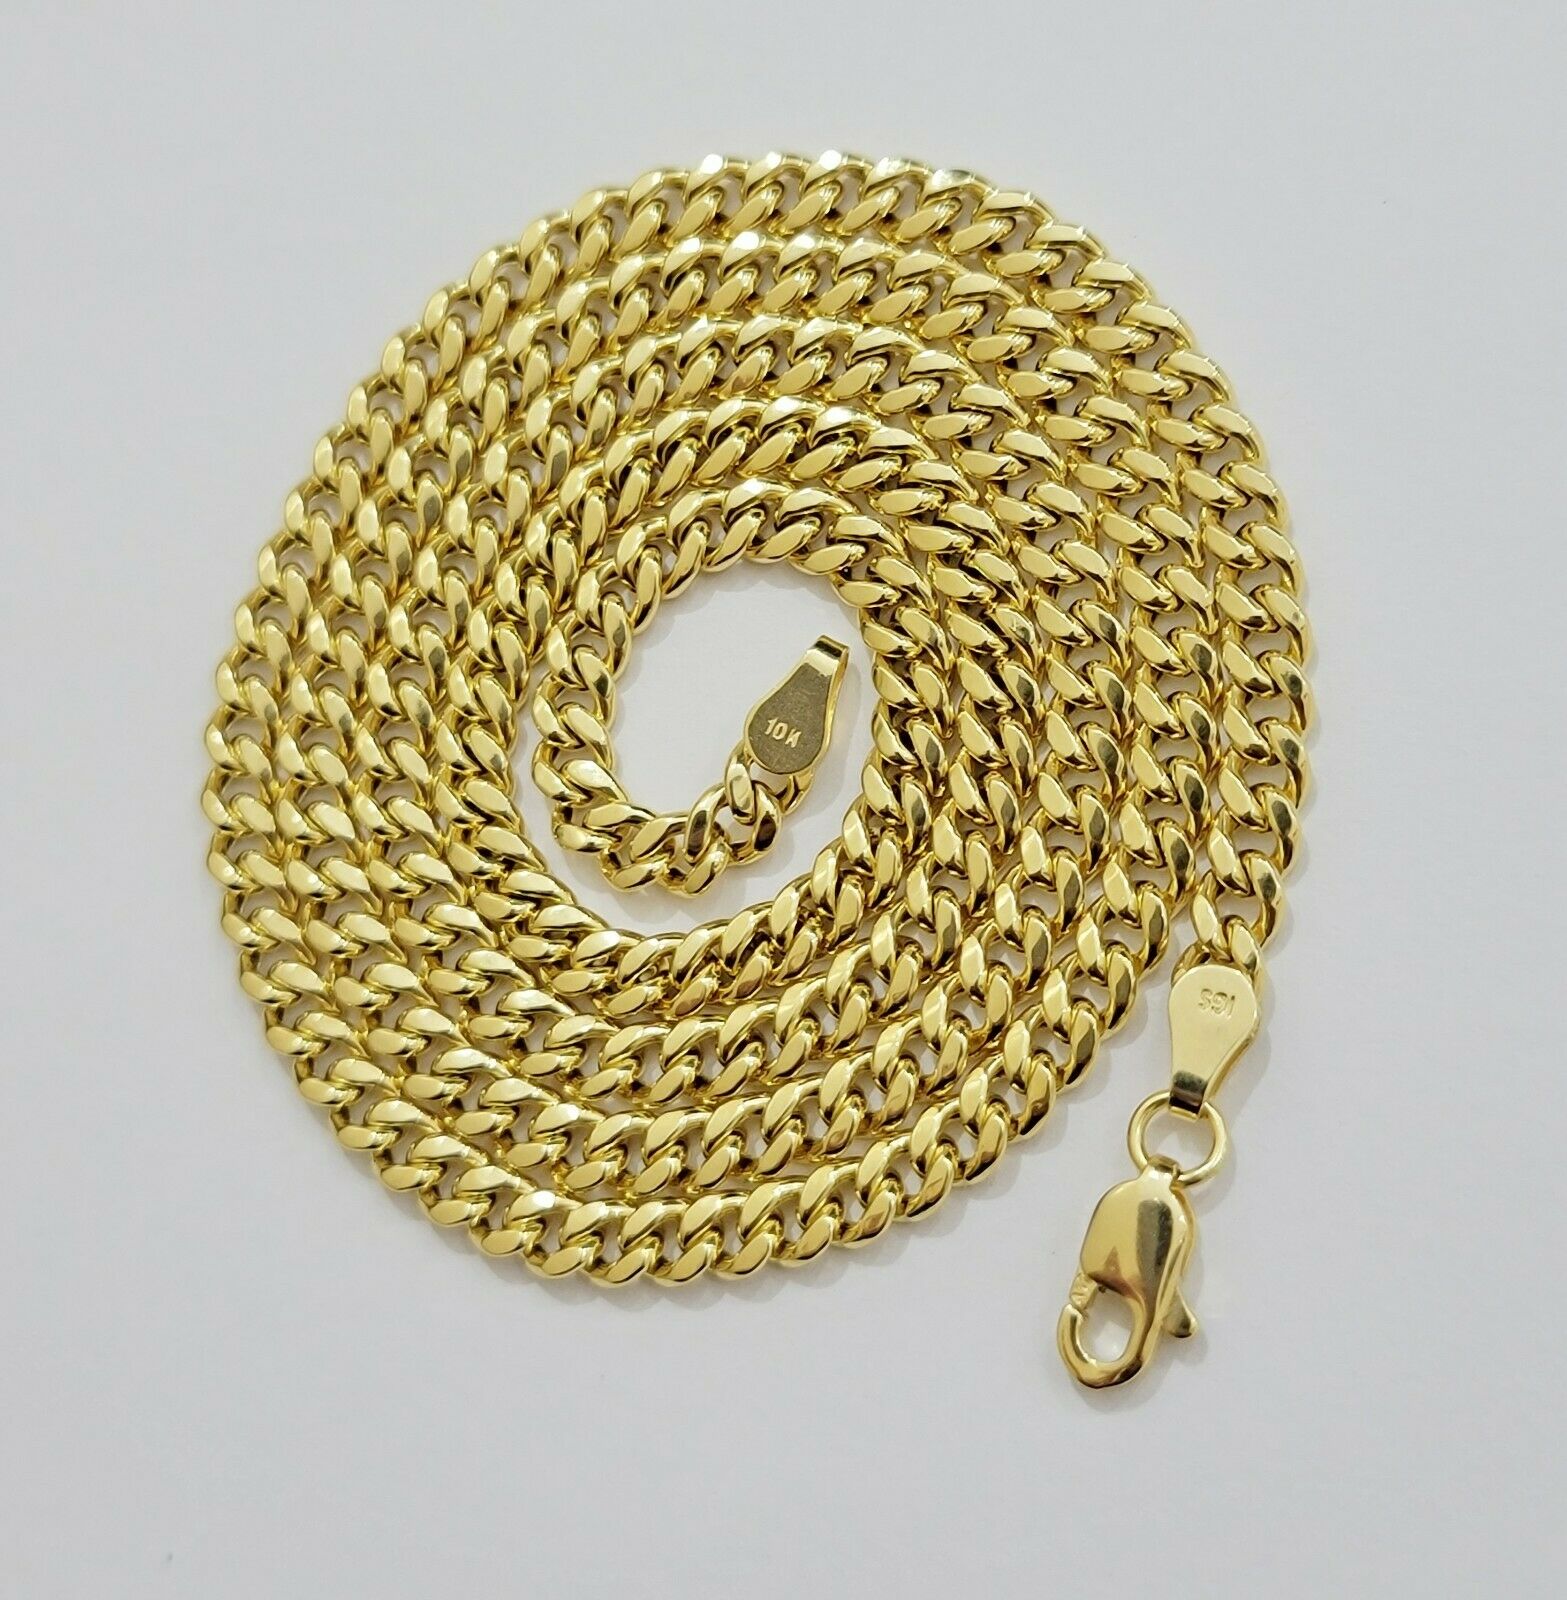 Real 10k Gold Miami Cuban 24" Chain Pendant Set 3.5mm Necklace World Map Charm